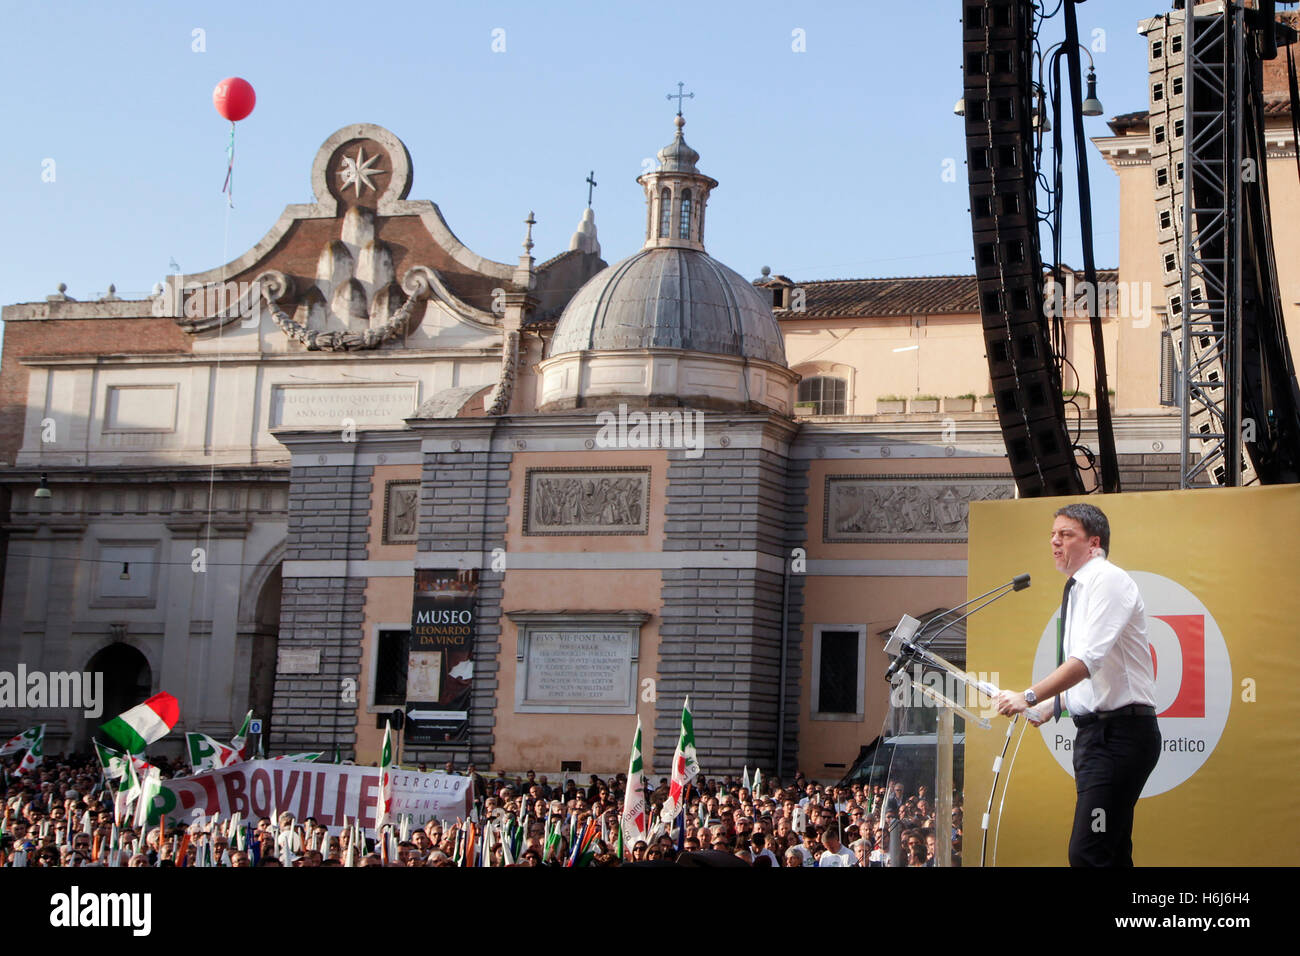 Rome, Italy, 29 October 2016. Matteo Renzi, Italy's primer minister, gestures as he speaks during a Democratic Party and referendum campaign rally in Rome, Italy. Credit: Sara De Marco/Alamy Live News Stock Photo